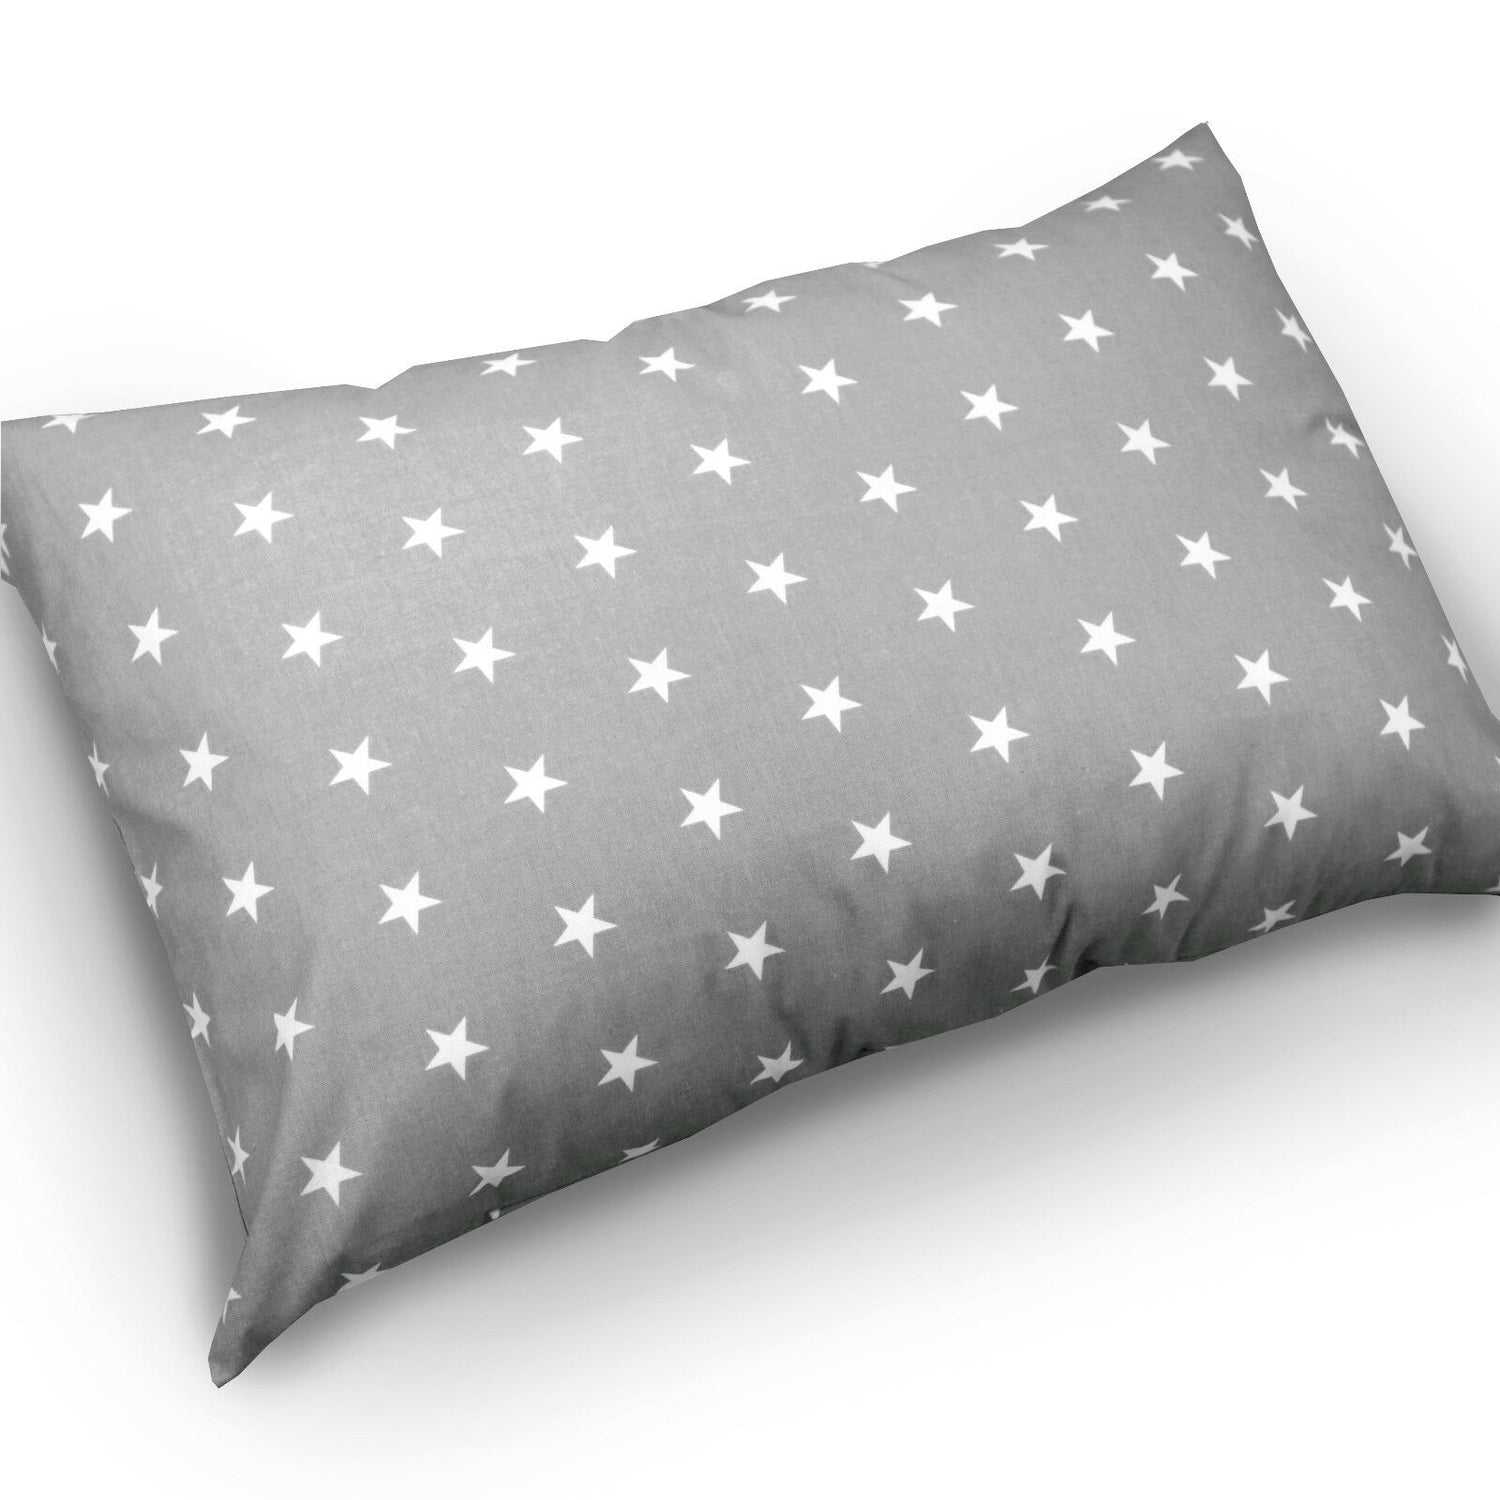 Baby Pillow case with zipper closure 60x40cm Cotton ANTI-ALLERGENIC Small white on Grey